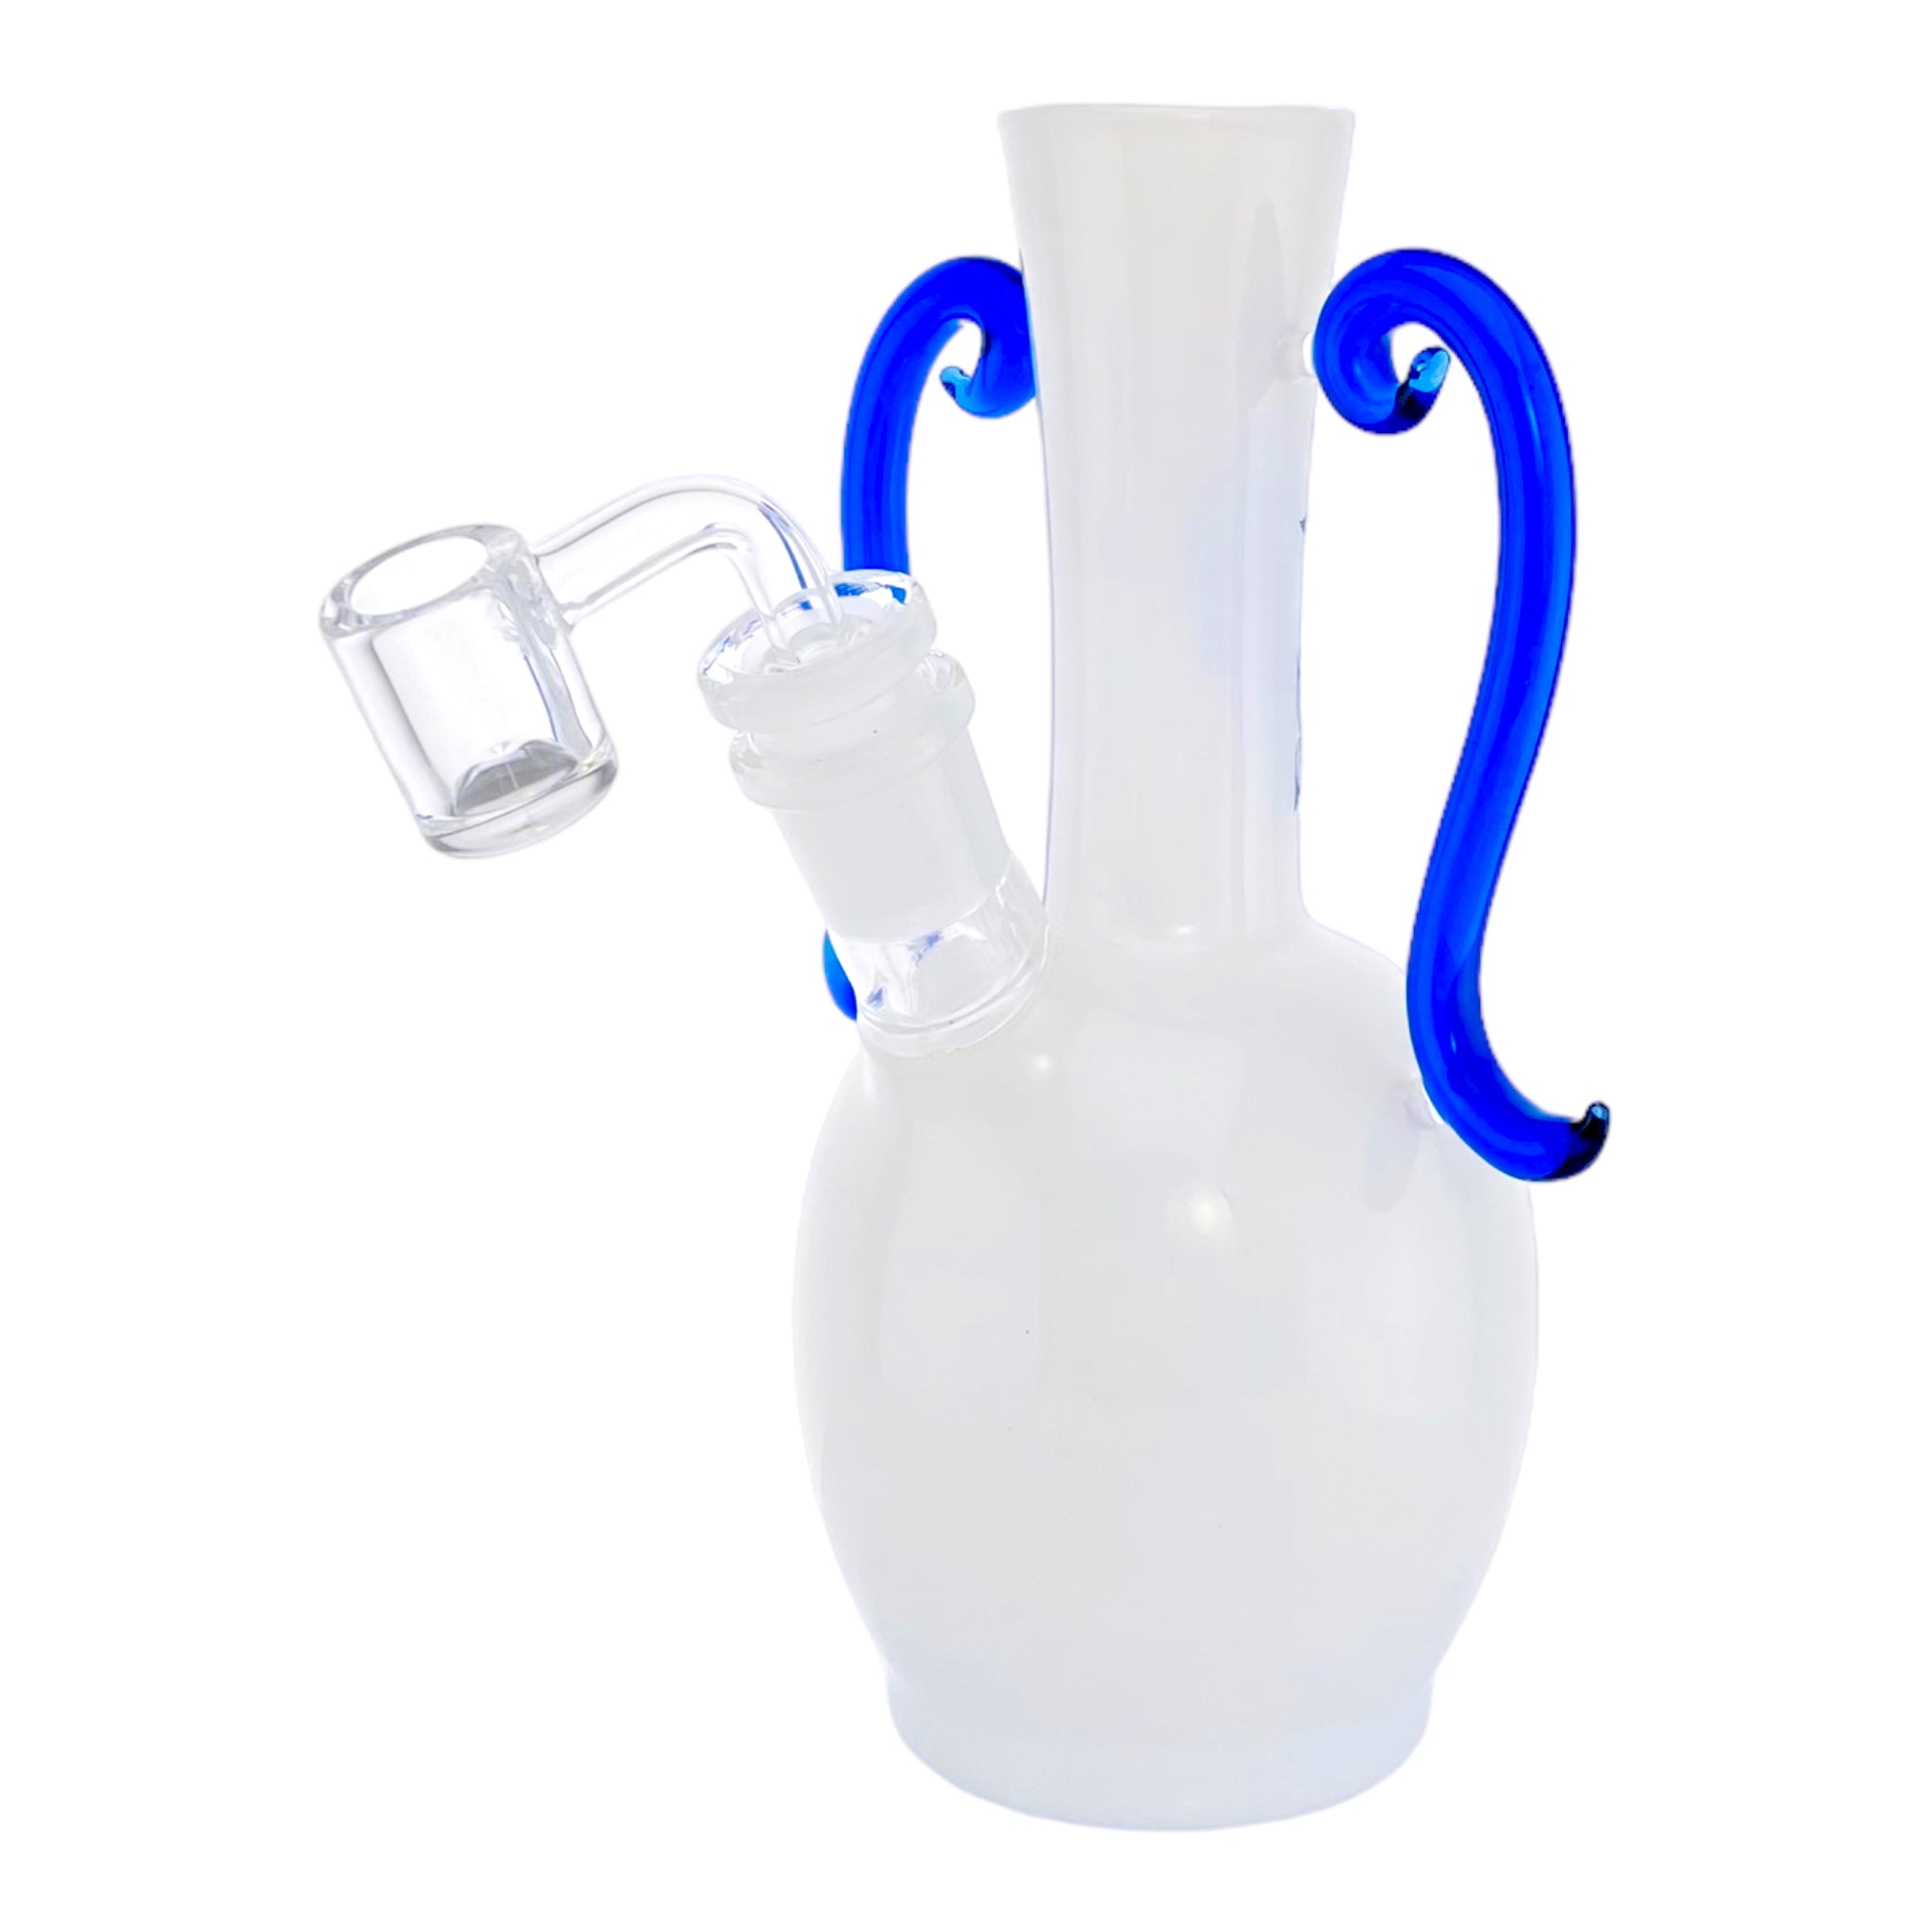 Decorative Vase Dab Rig made from white and blue glass